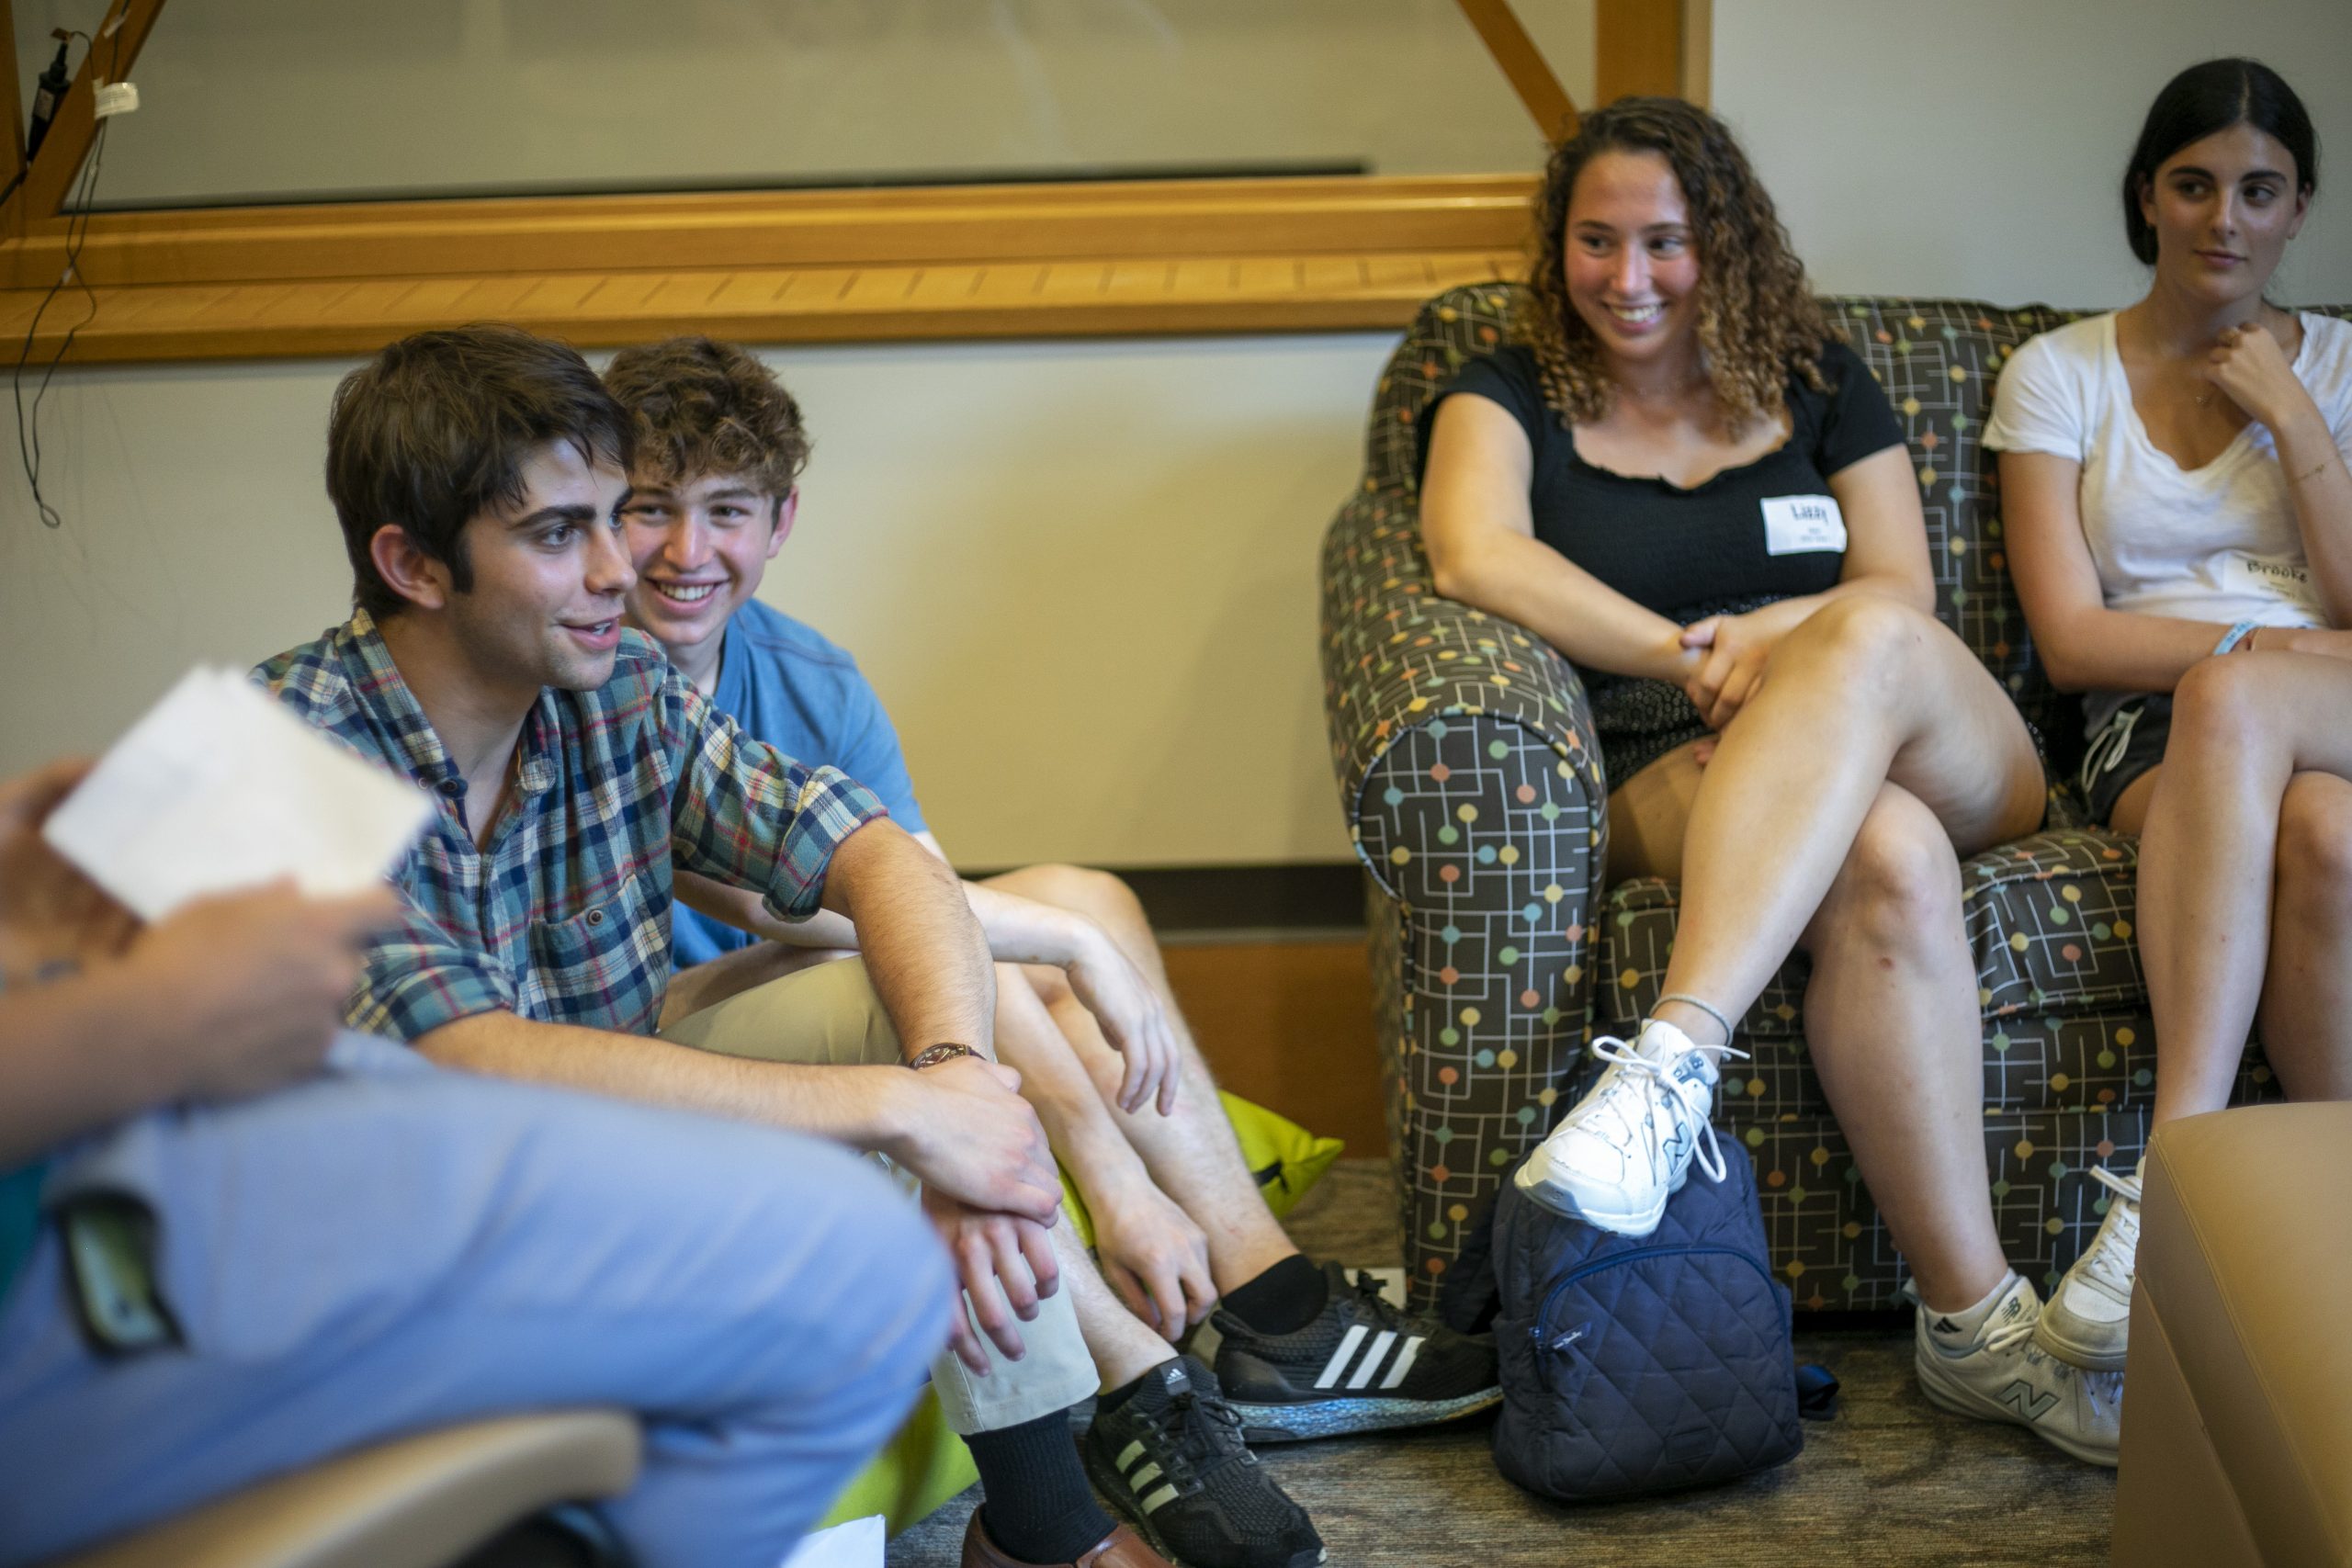 Students have a conversation at the student center